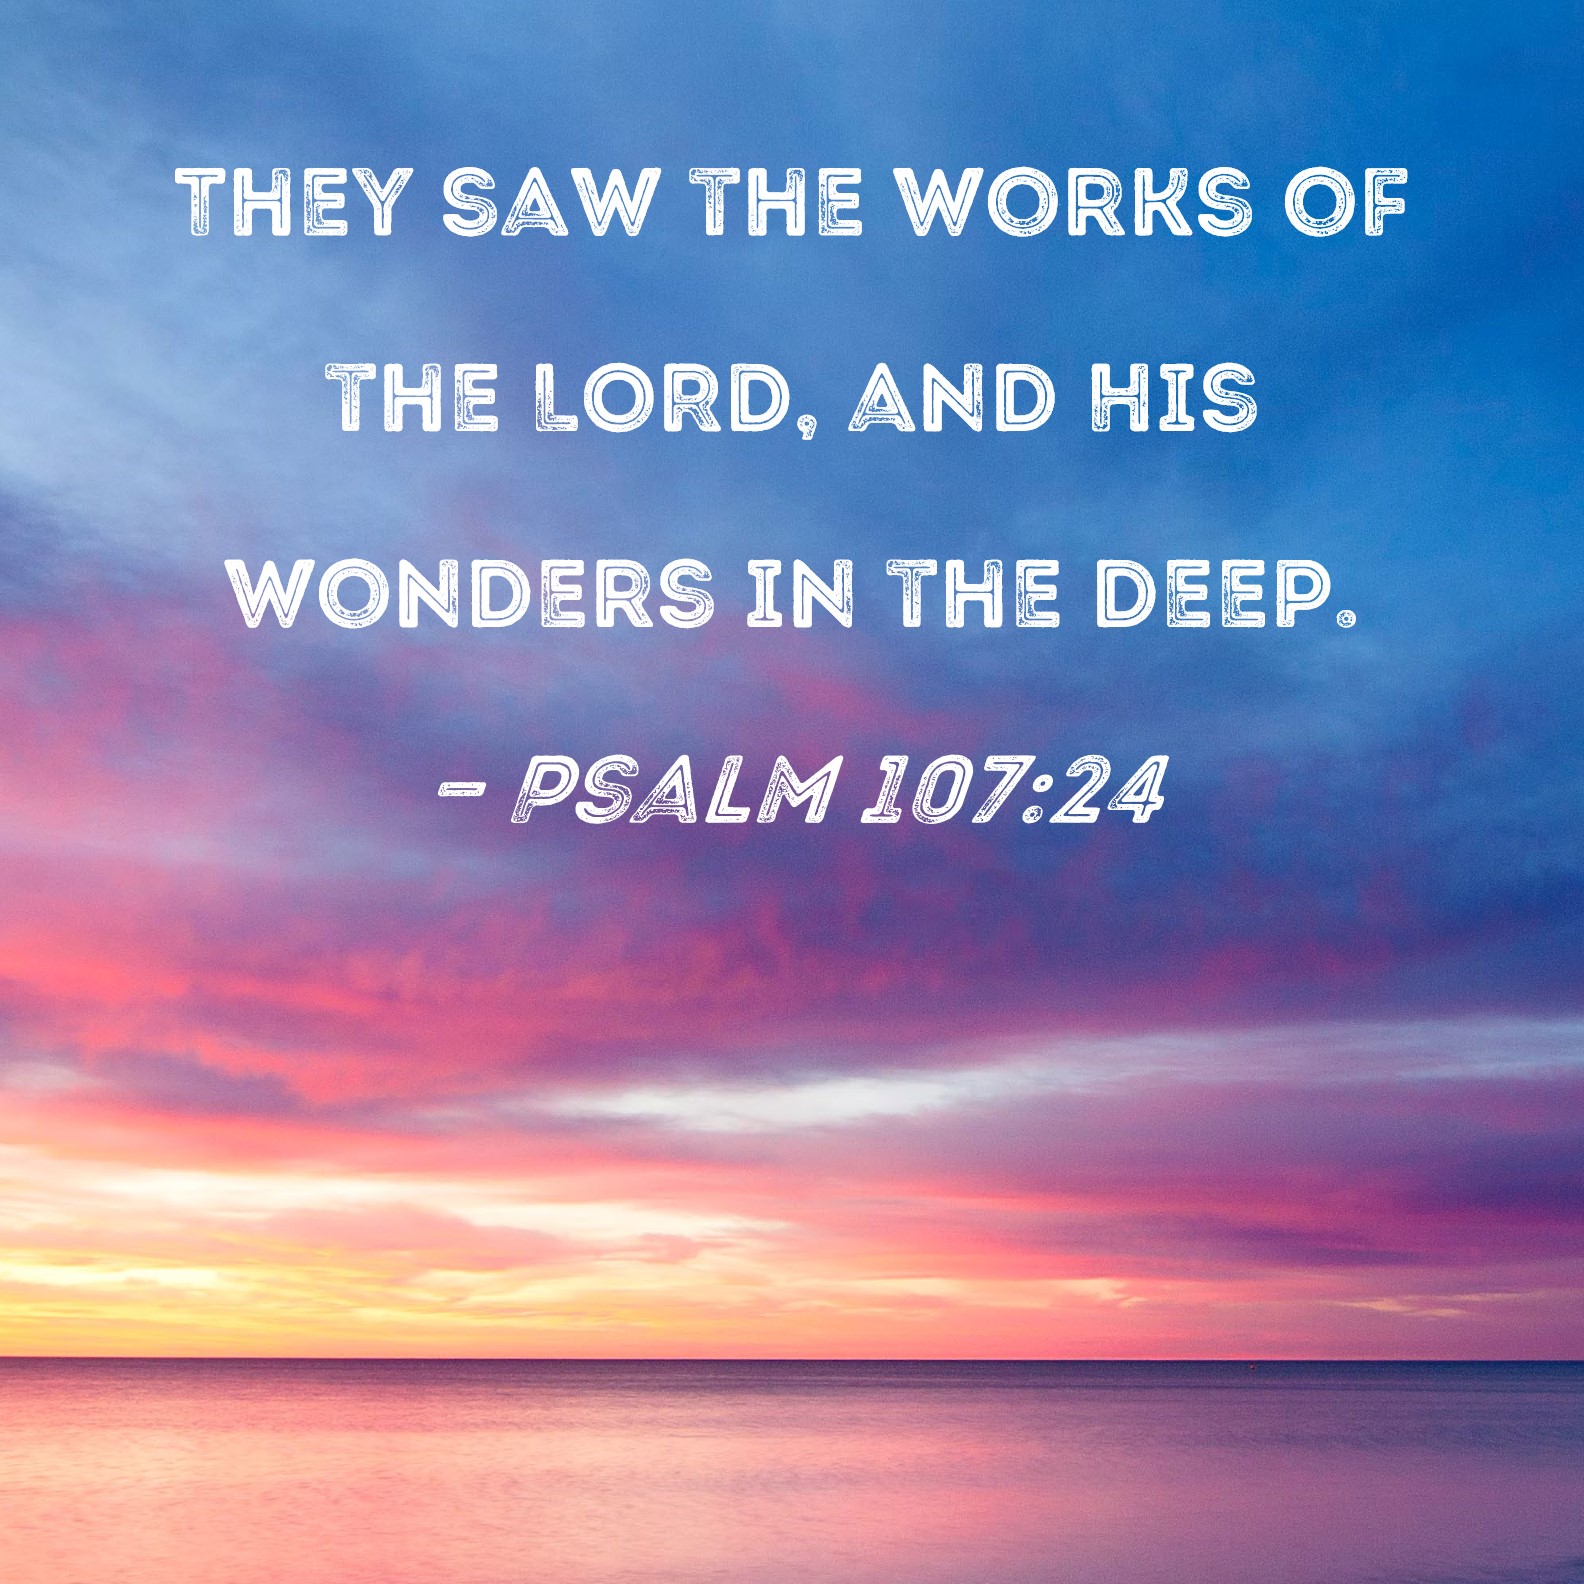 Psalm 107:24 They saw the works of the LORD, and His wonders in the deep.